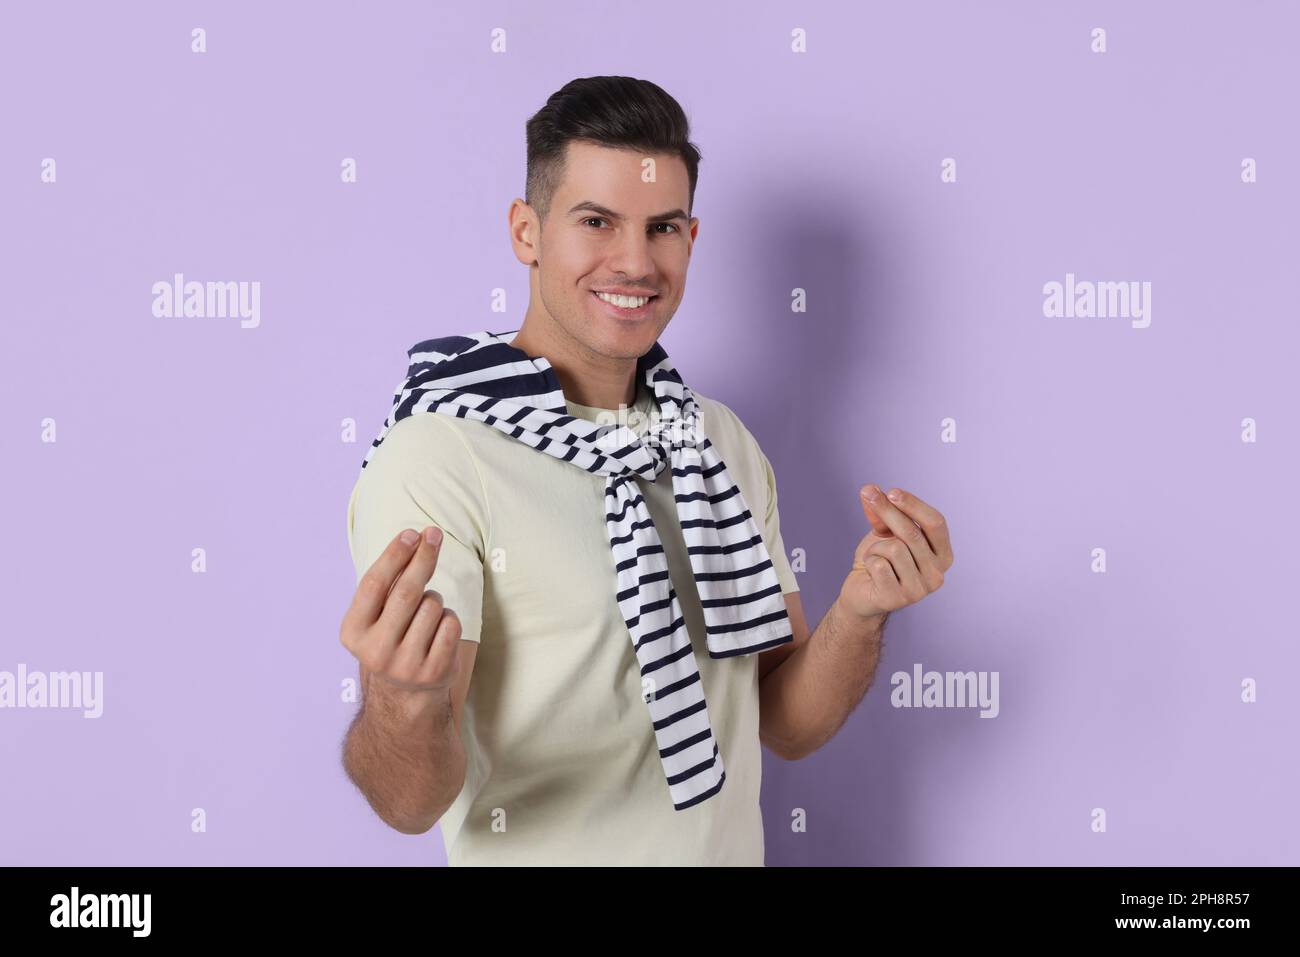 Handsome man snapping fingers on violet background Stock Photo